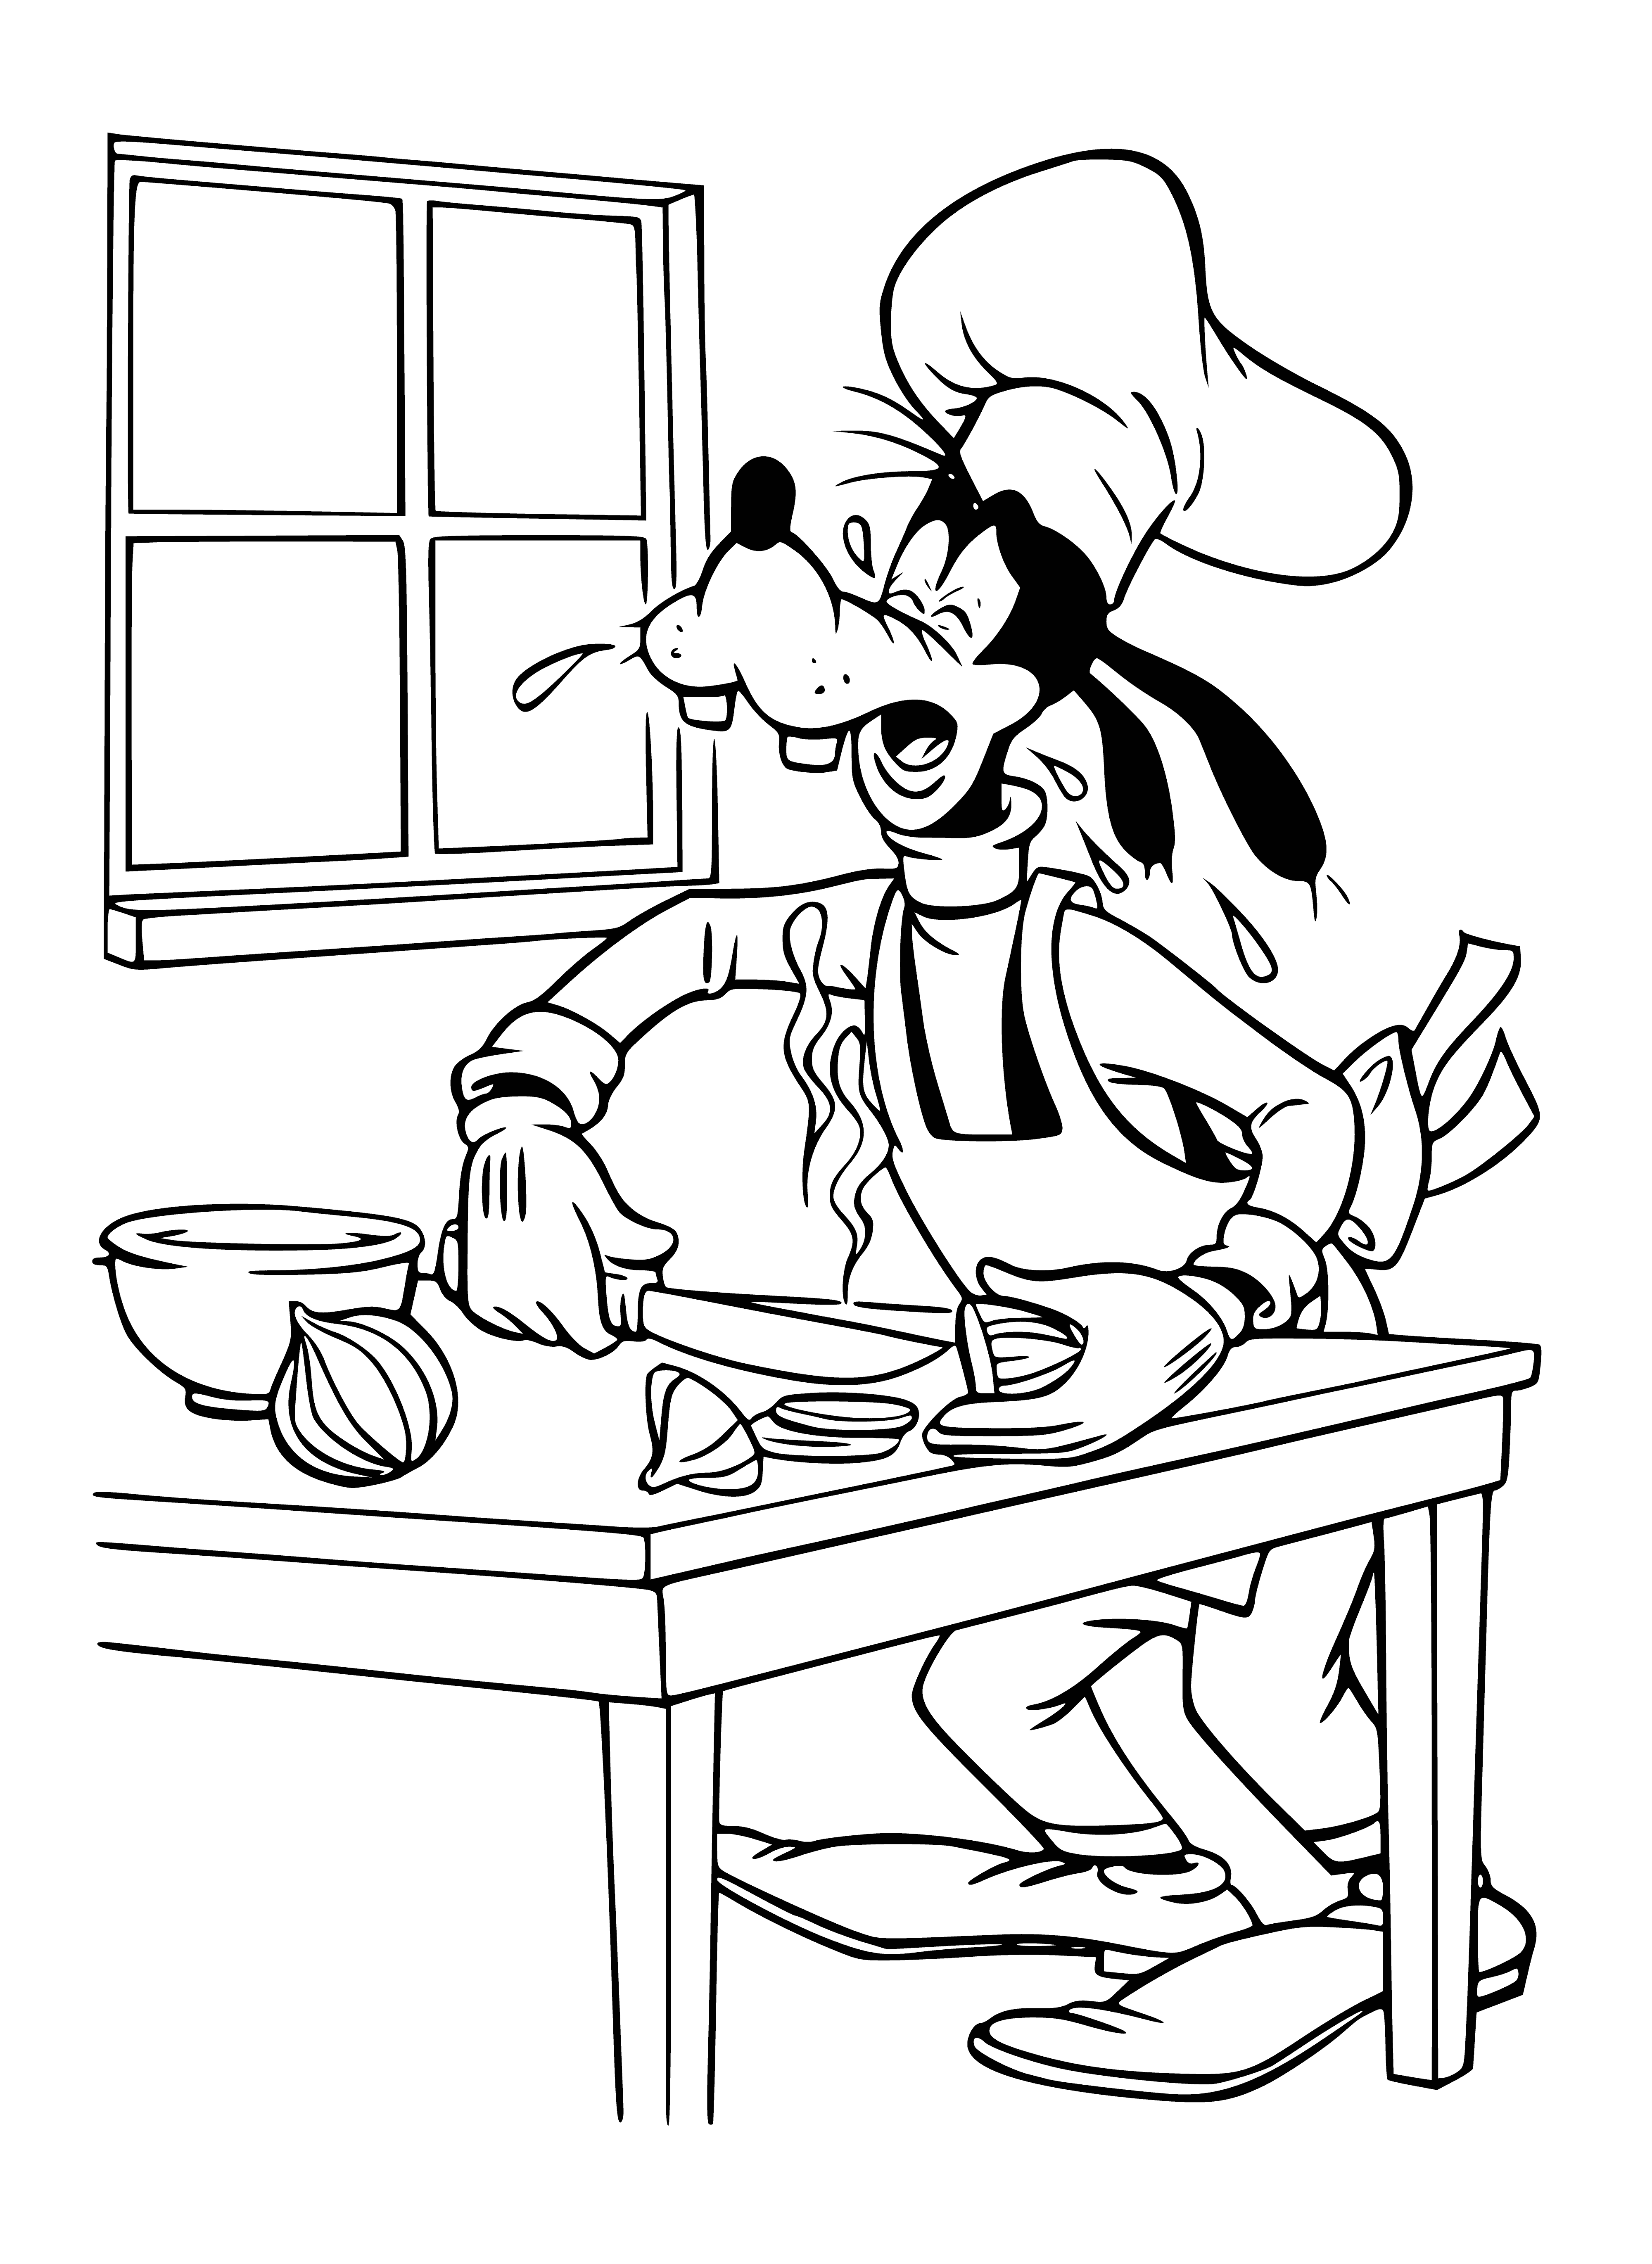 coloring page: Mickey Mouse is cutting an onion with a knife, holding it with one hand and a cutting board nearby.